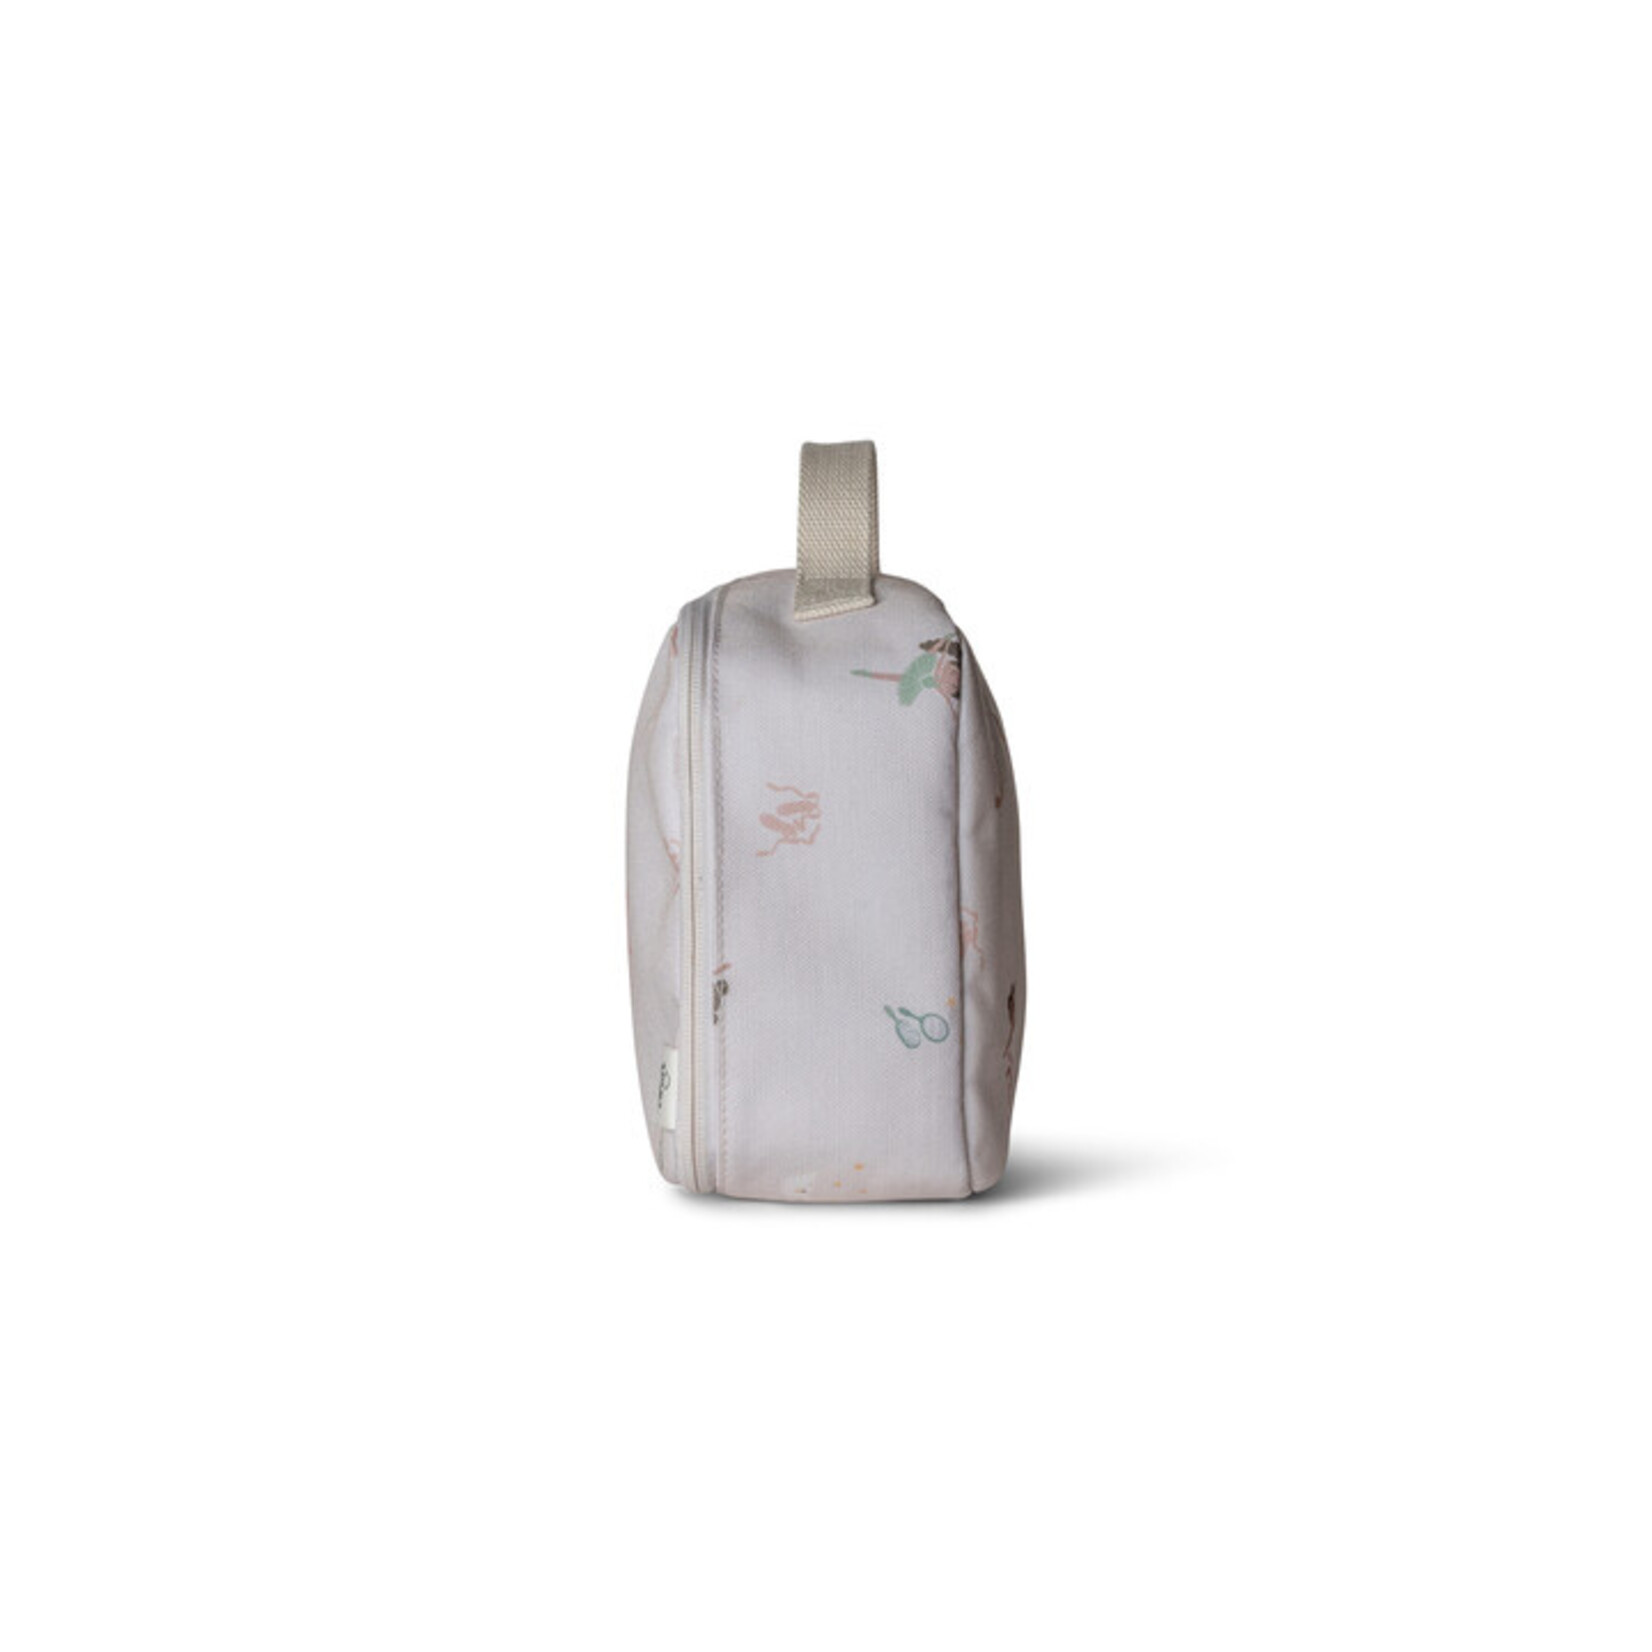 Insulated Square Lunchbag Ballerina